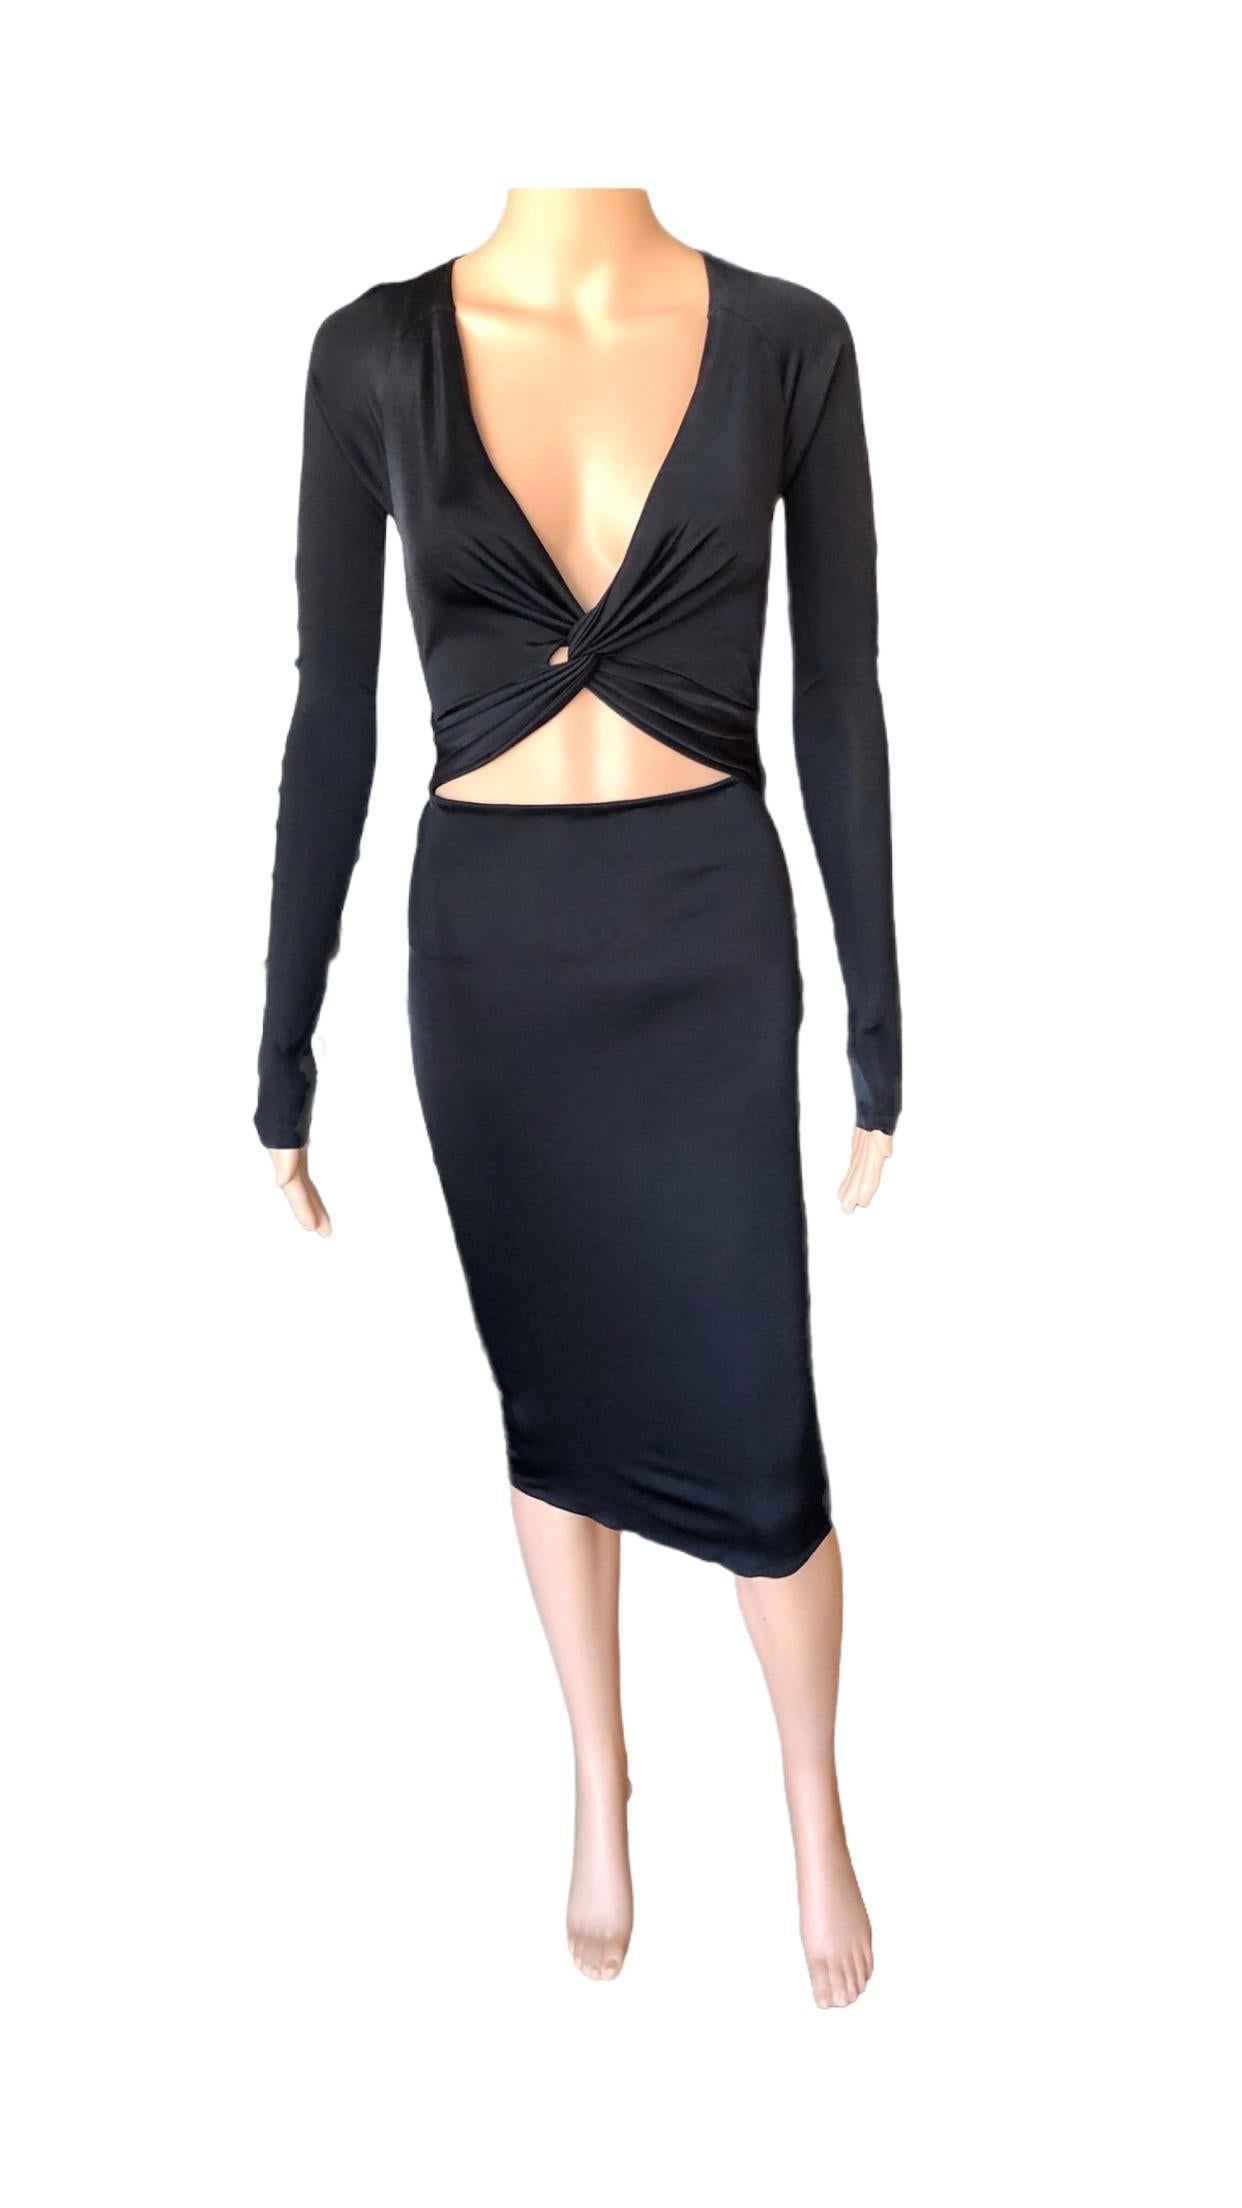 Gucci S/S 2005 Tom Ford Plunging Cutout Backless Bodycon Black Dress For Sale 12